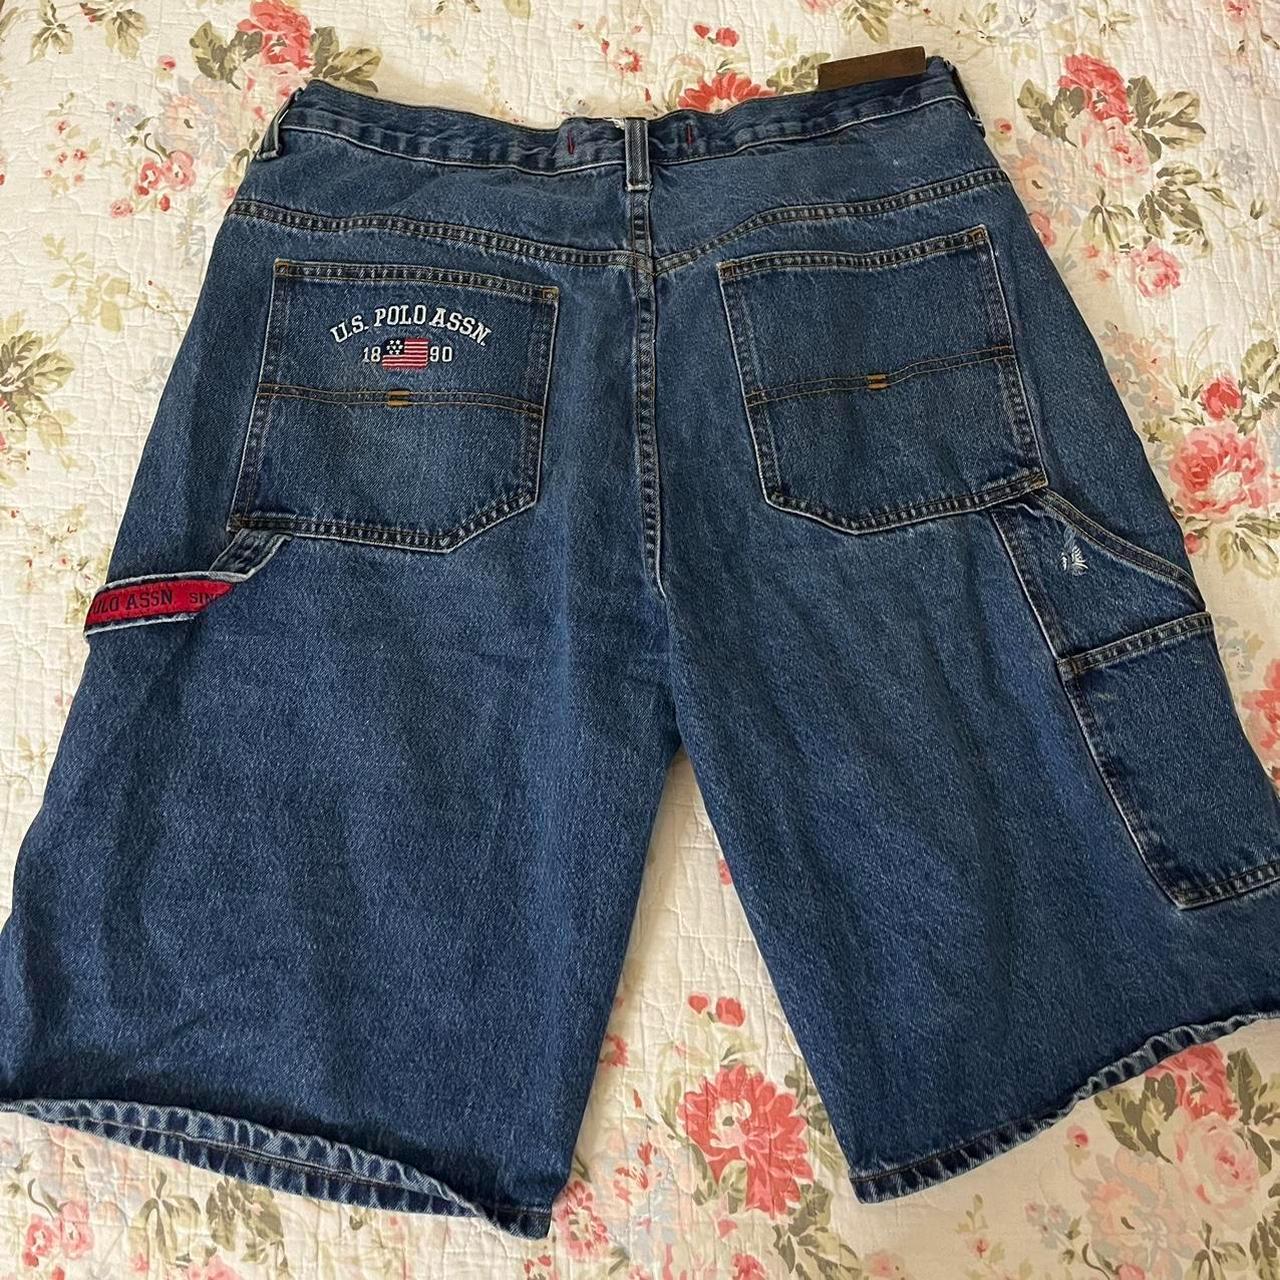 U.S. Polo Assn. Jean Shorts The tag is lifted (pic... - Depop